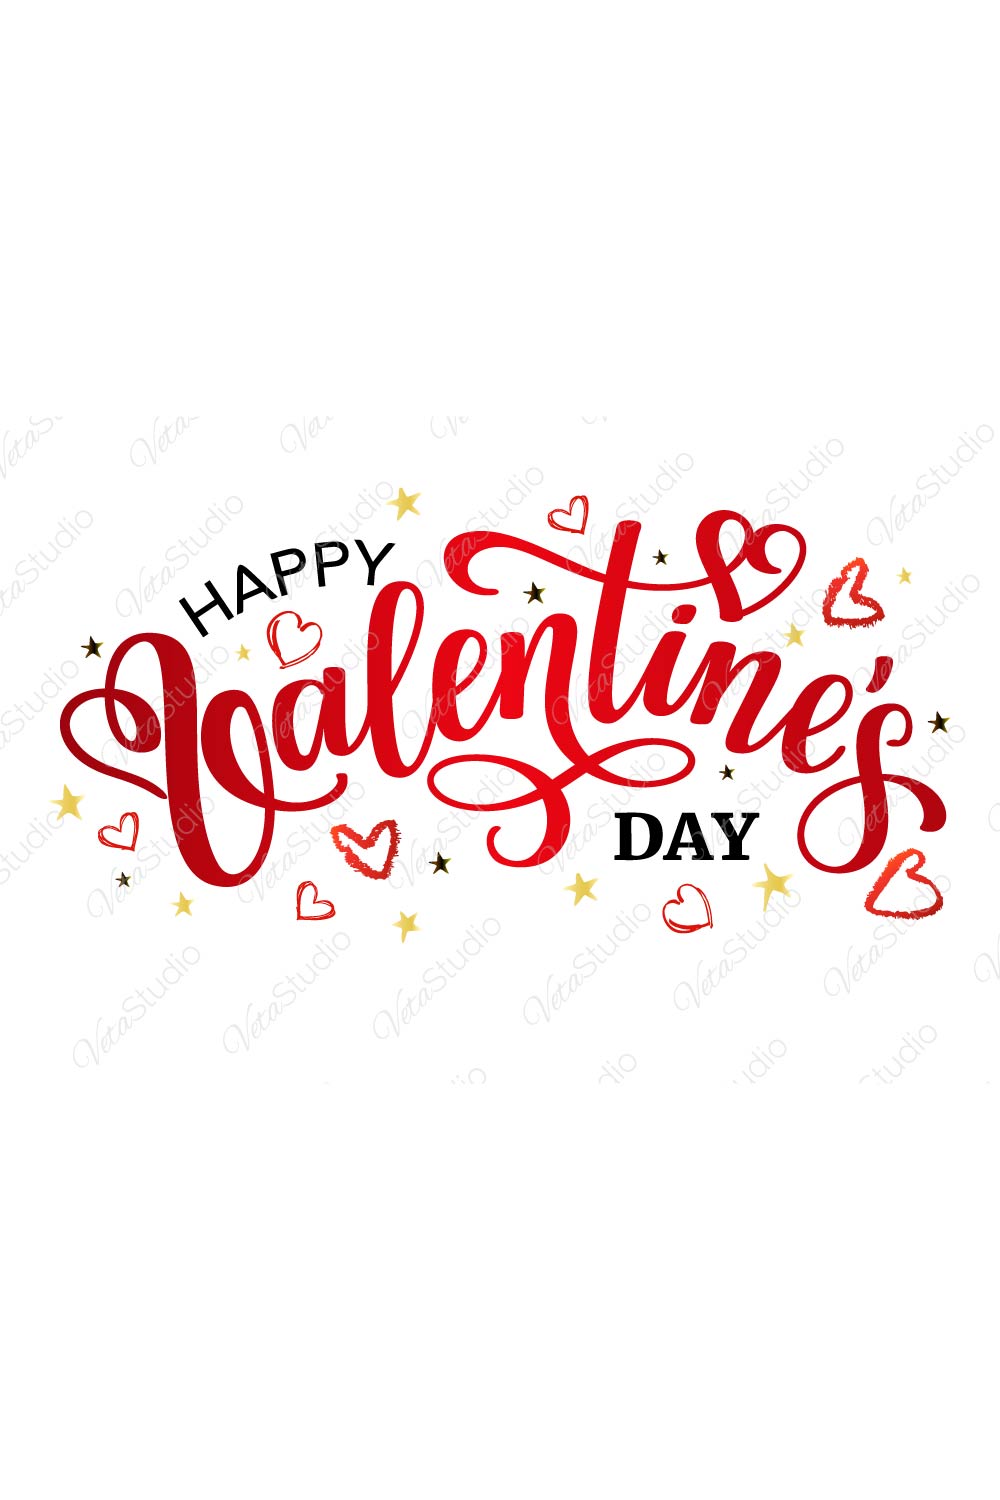 Happy Valentines Day Red Lettering Design pinterest image.